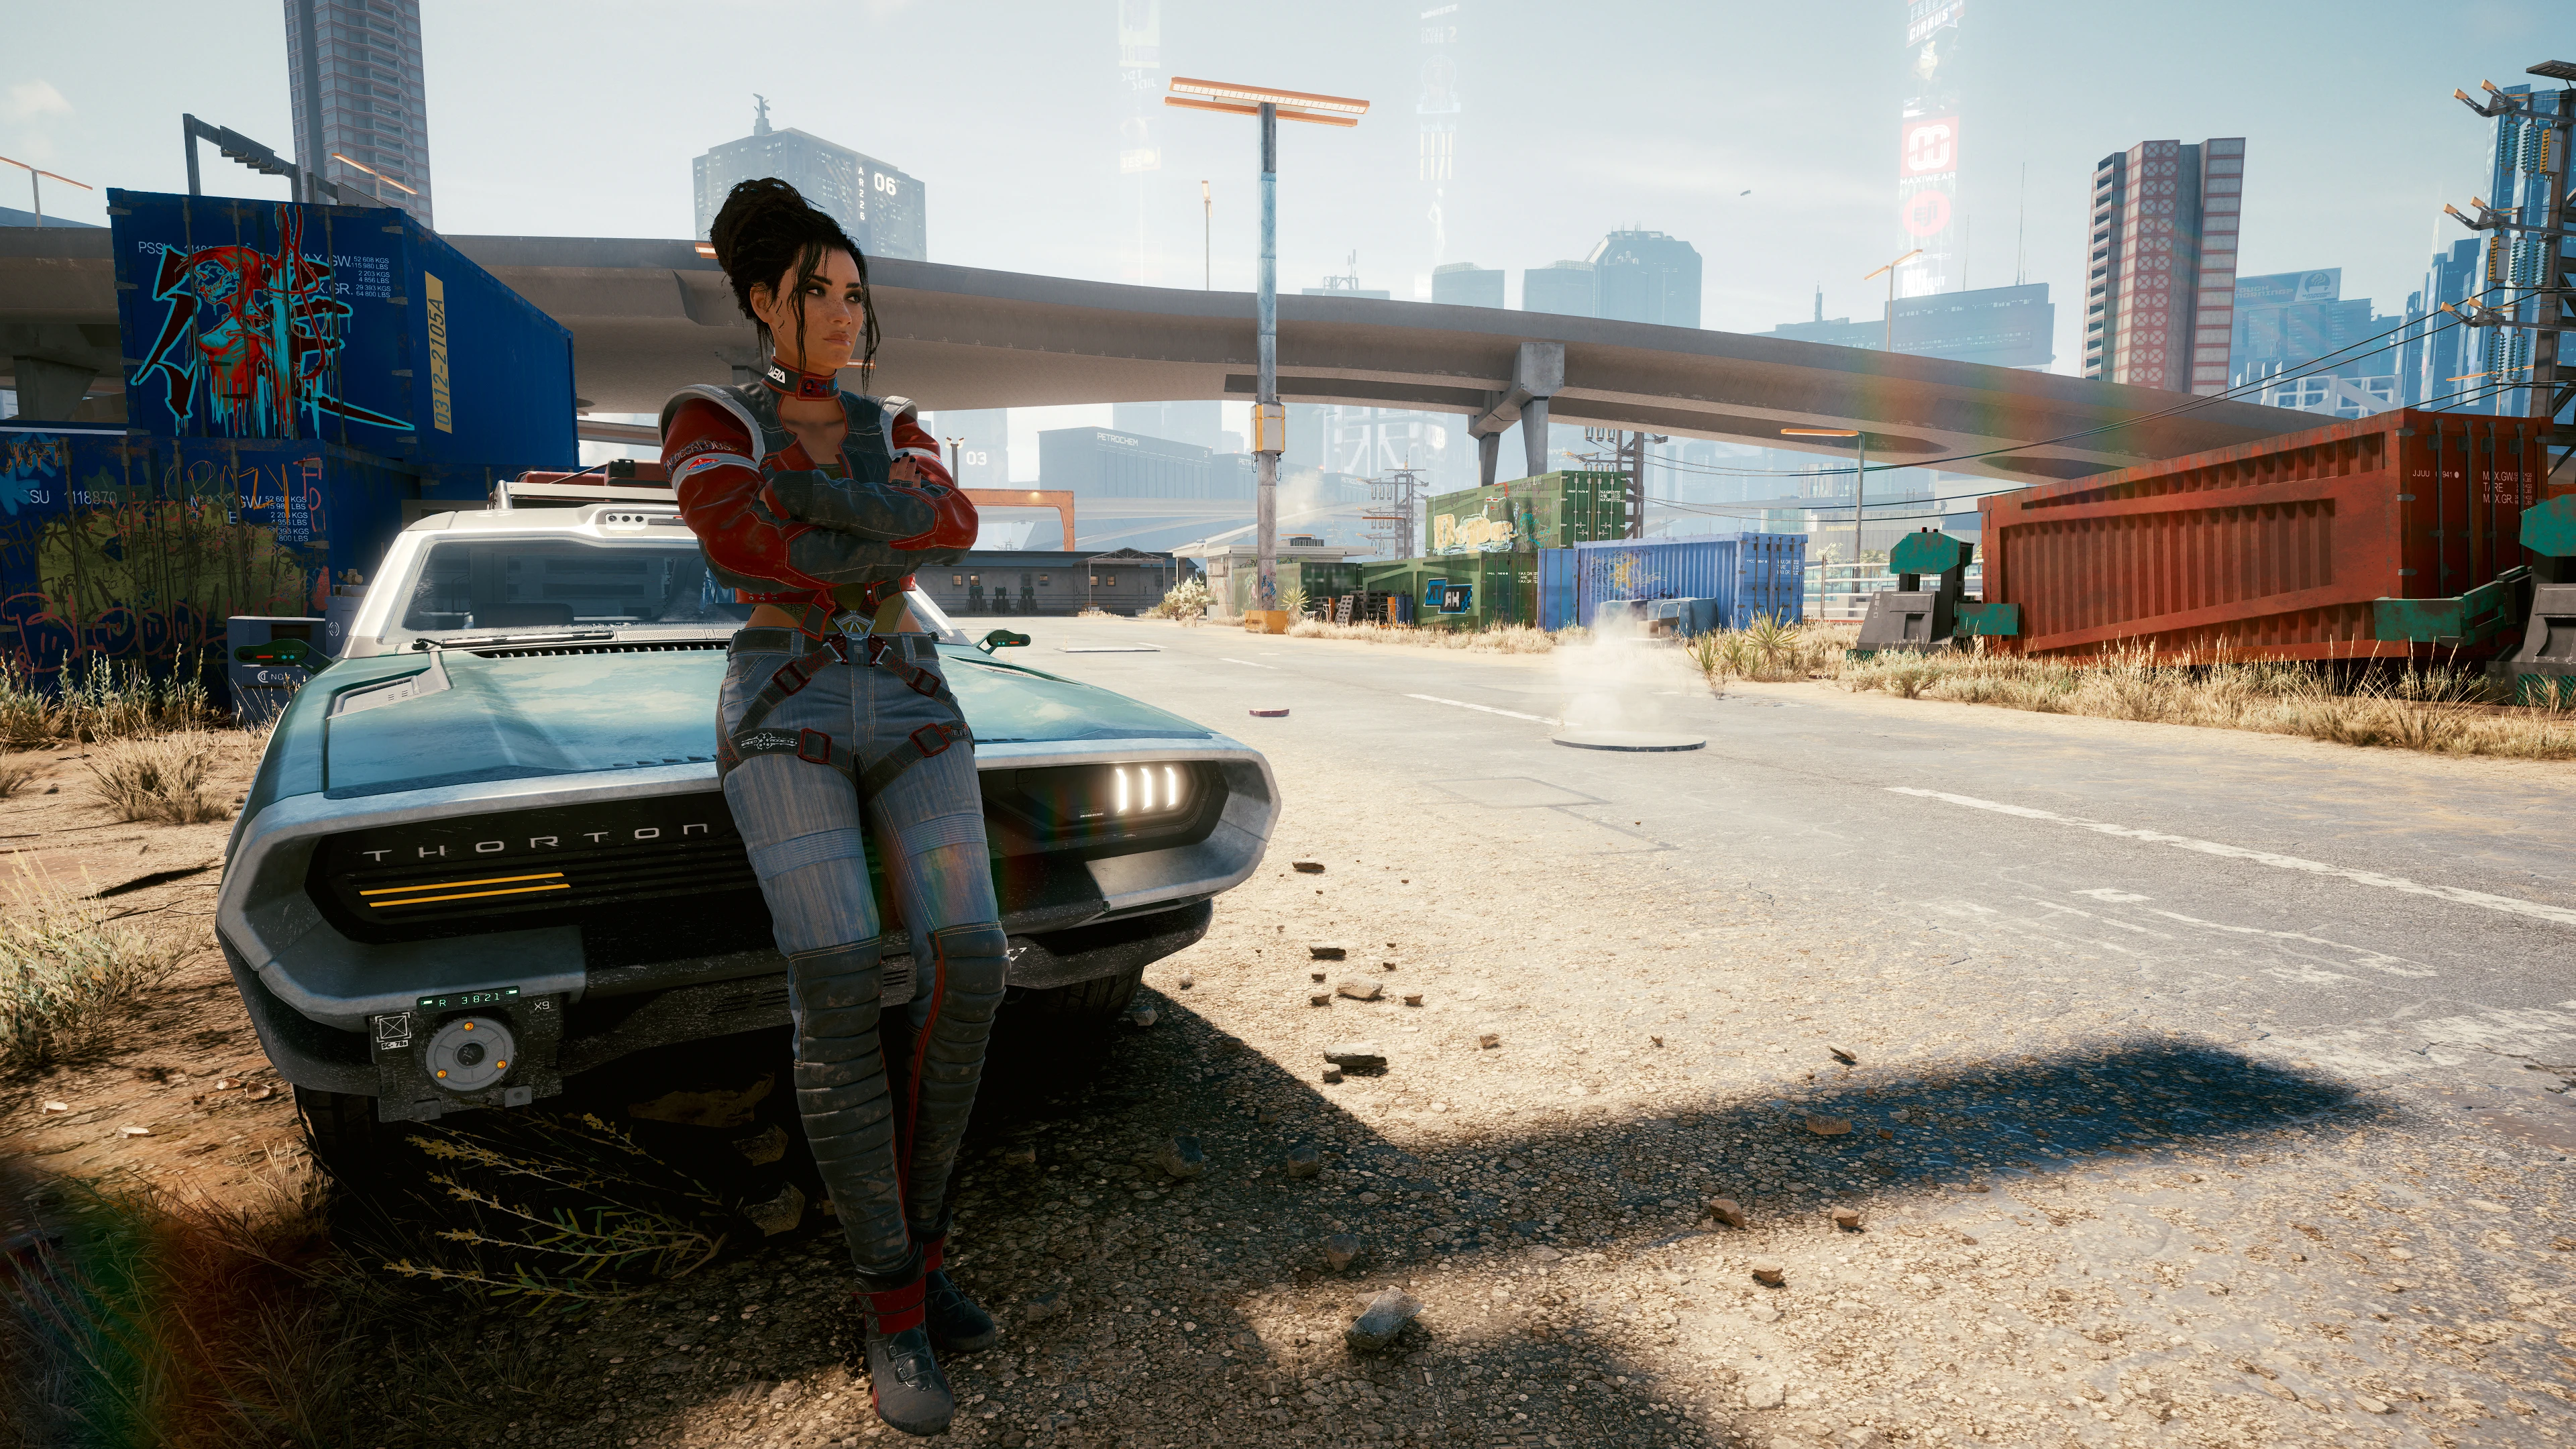 Featured image of post Cyberpunk 2077 Panam 4K Wallpaper Hd cyberpunk 2077 4k wallpaper background image gallery in different resolutions like 1280x720